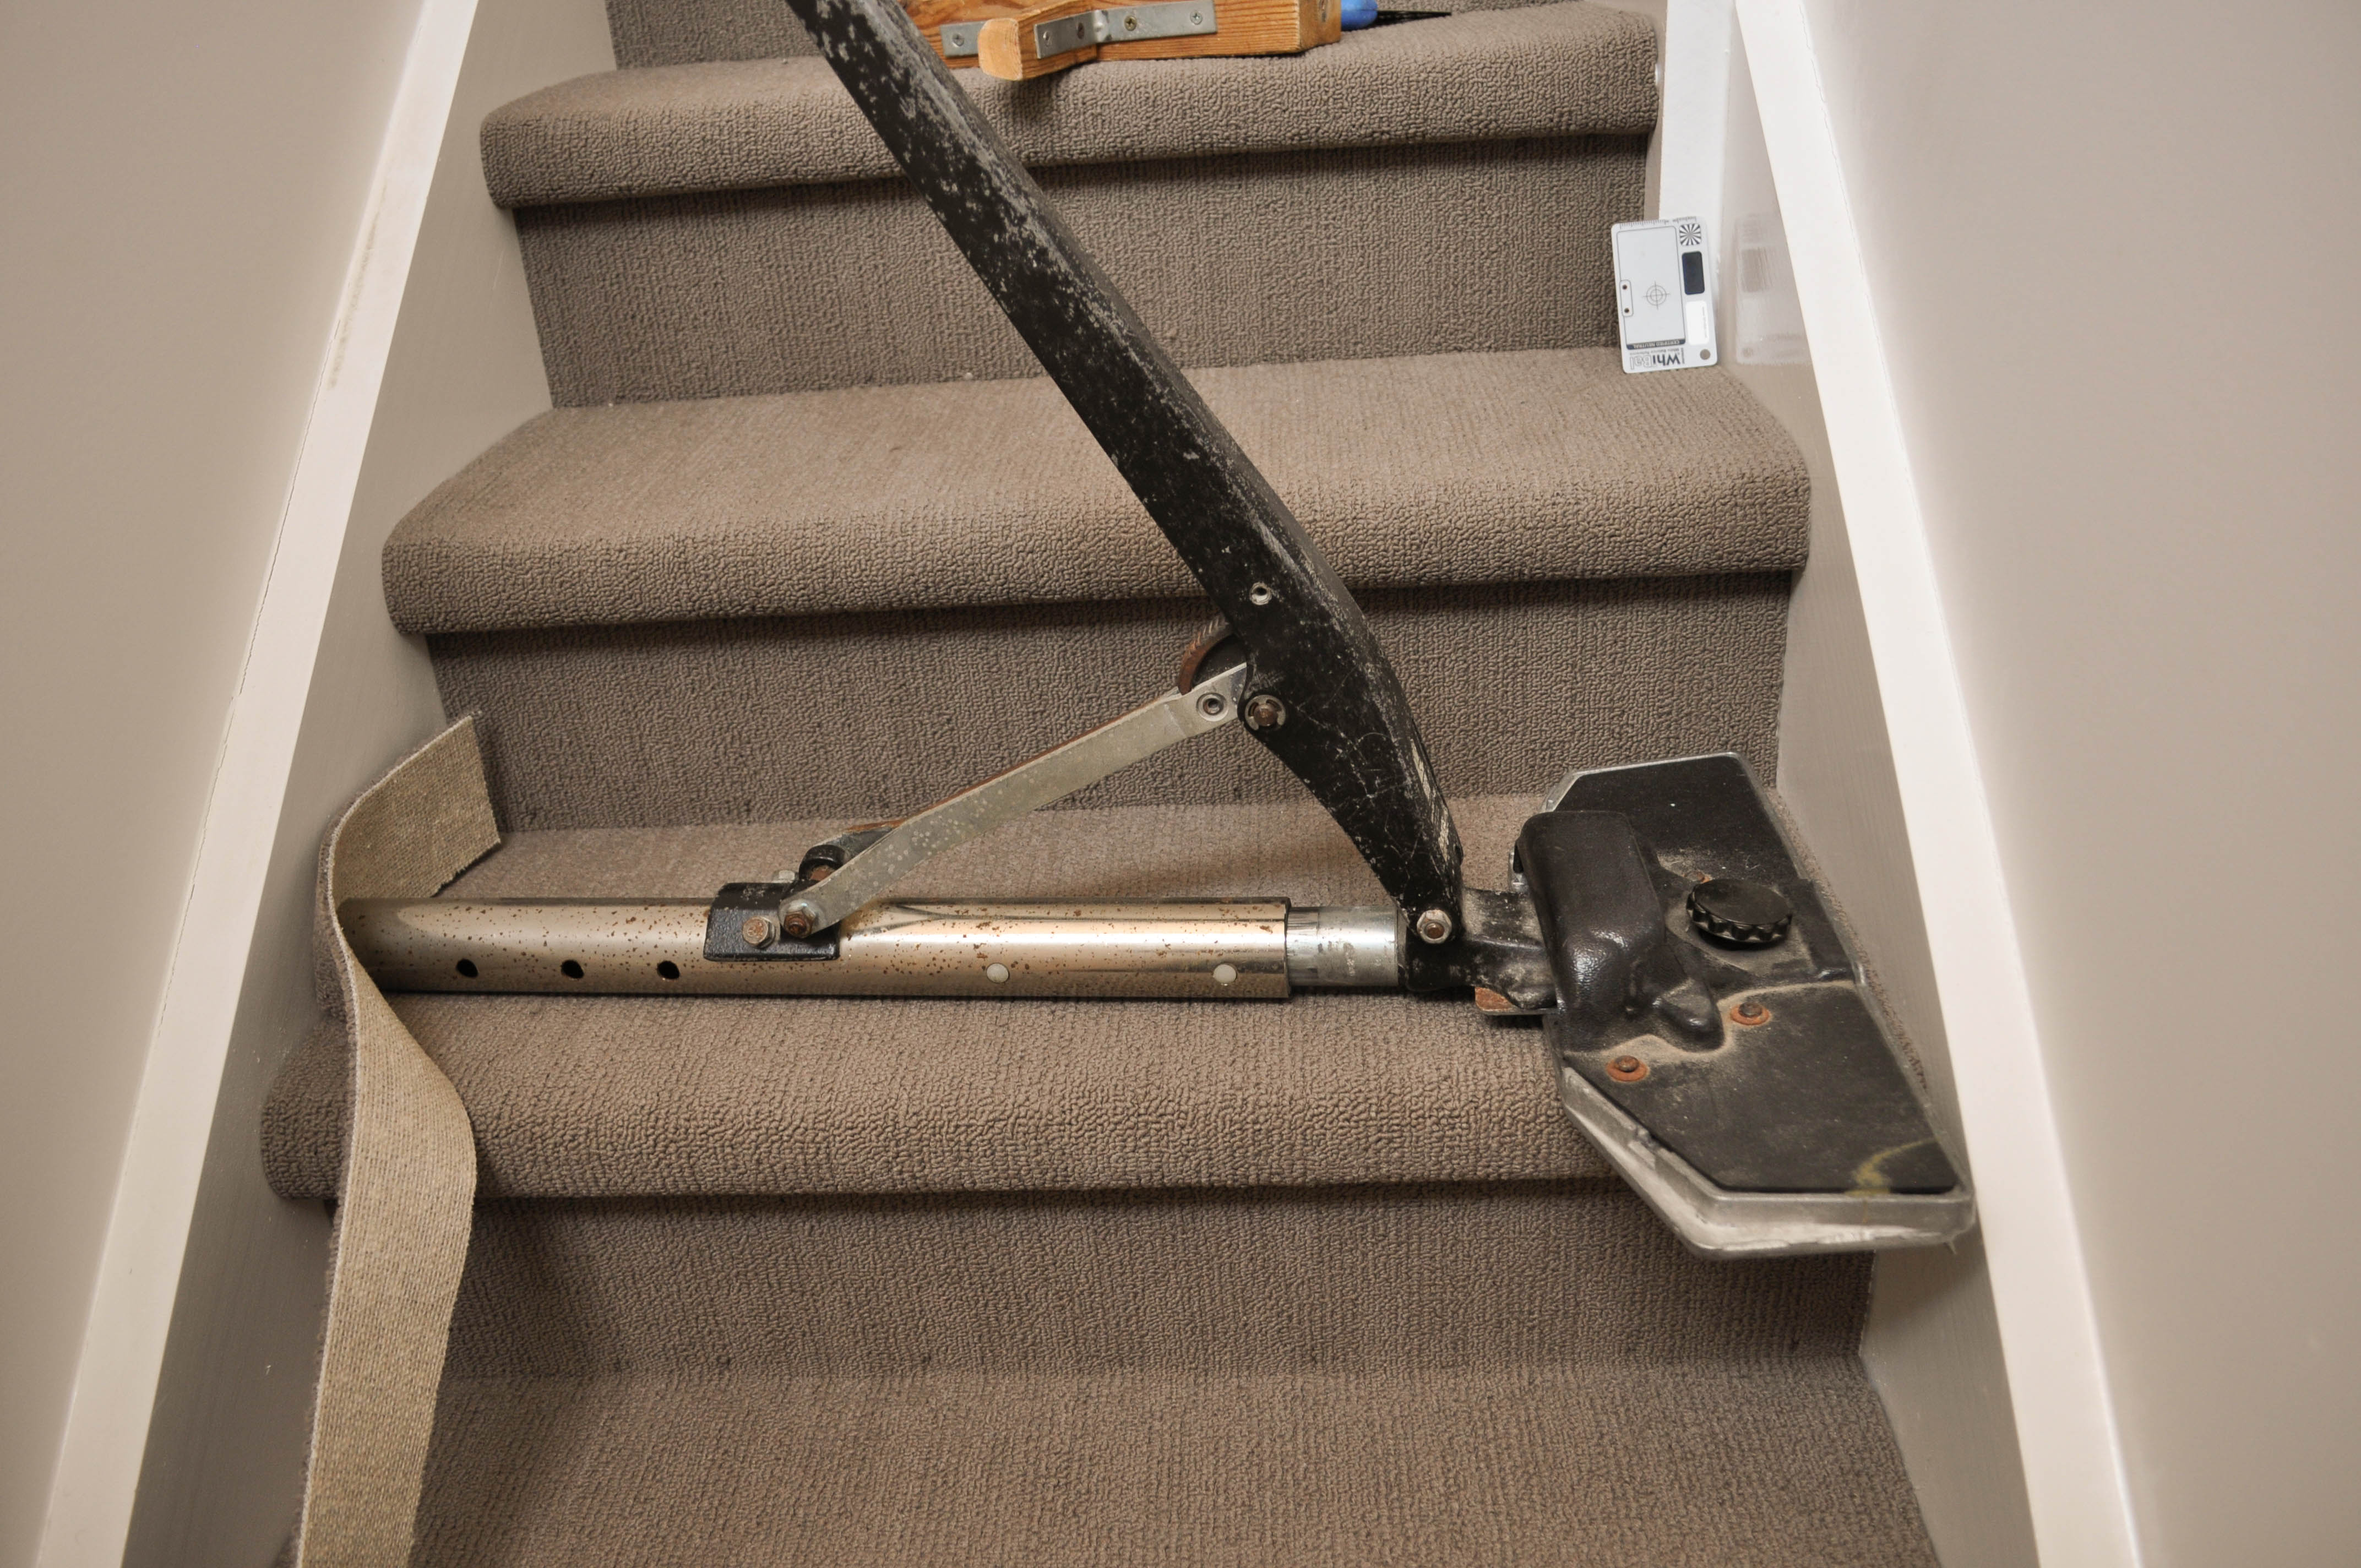 showing three steps with a power stretcher positioned across one and in action stretching the carpet across the step
to tense it and remove any ripples the carpet may have. Carpet is being laid by Concord Floorsin a house in Point Cook, Werribee, Vic 3030.